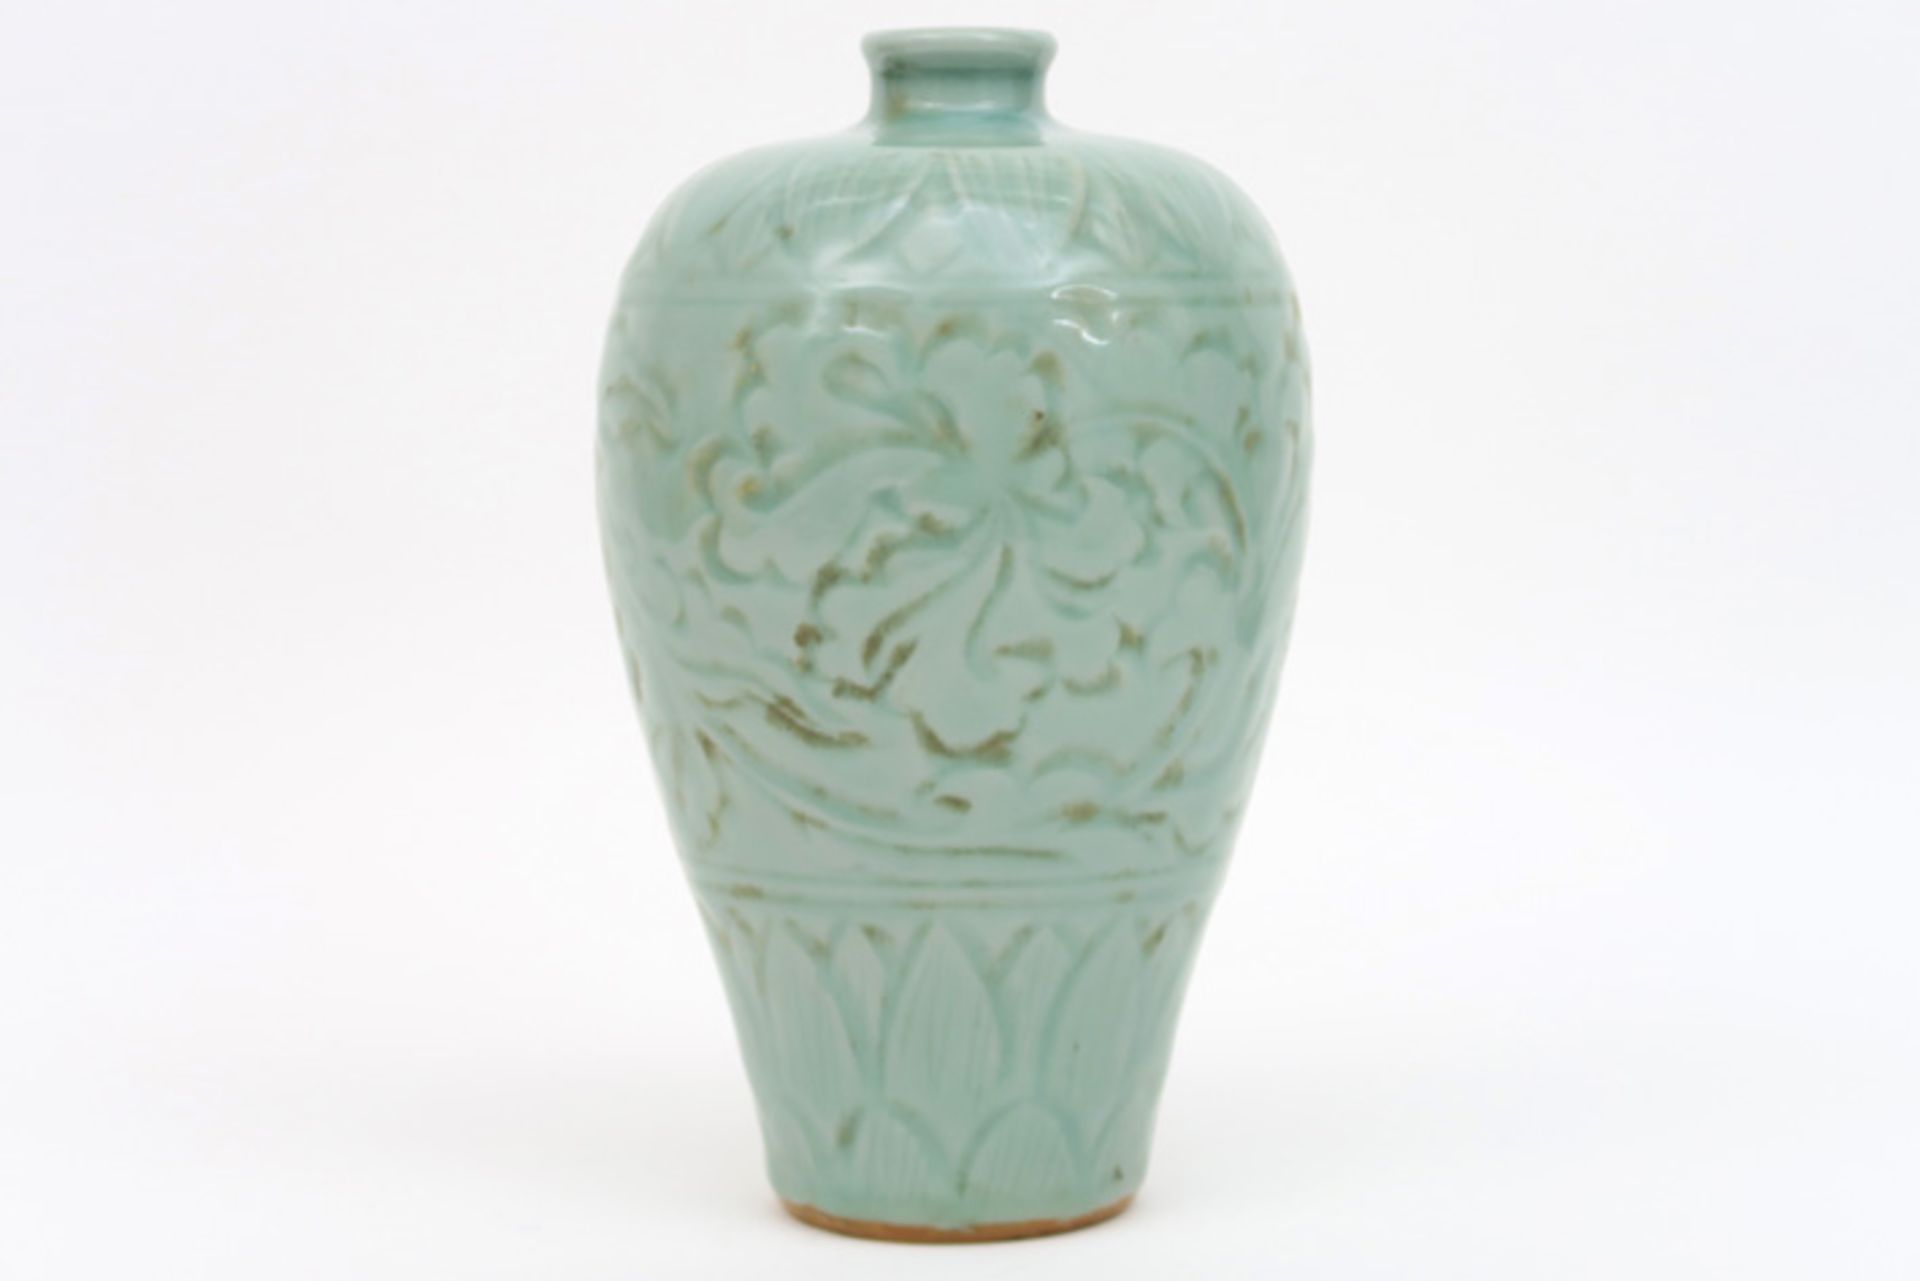 Chinese vase in celadon porcelain with a vegetal relief decor under a green glaze||Chinese vaas in